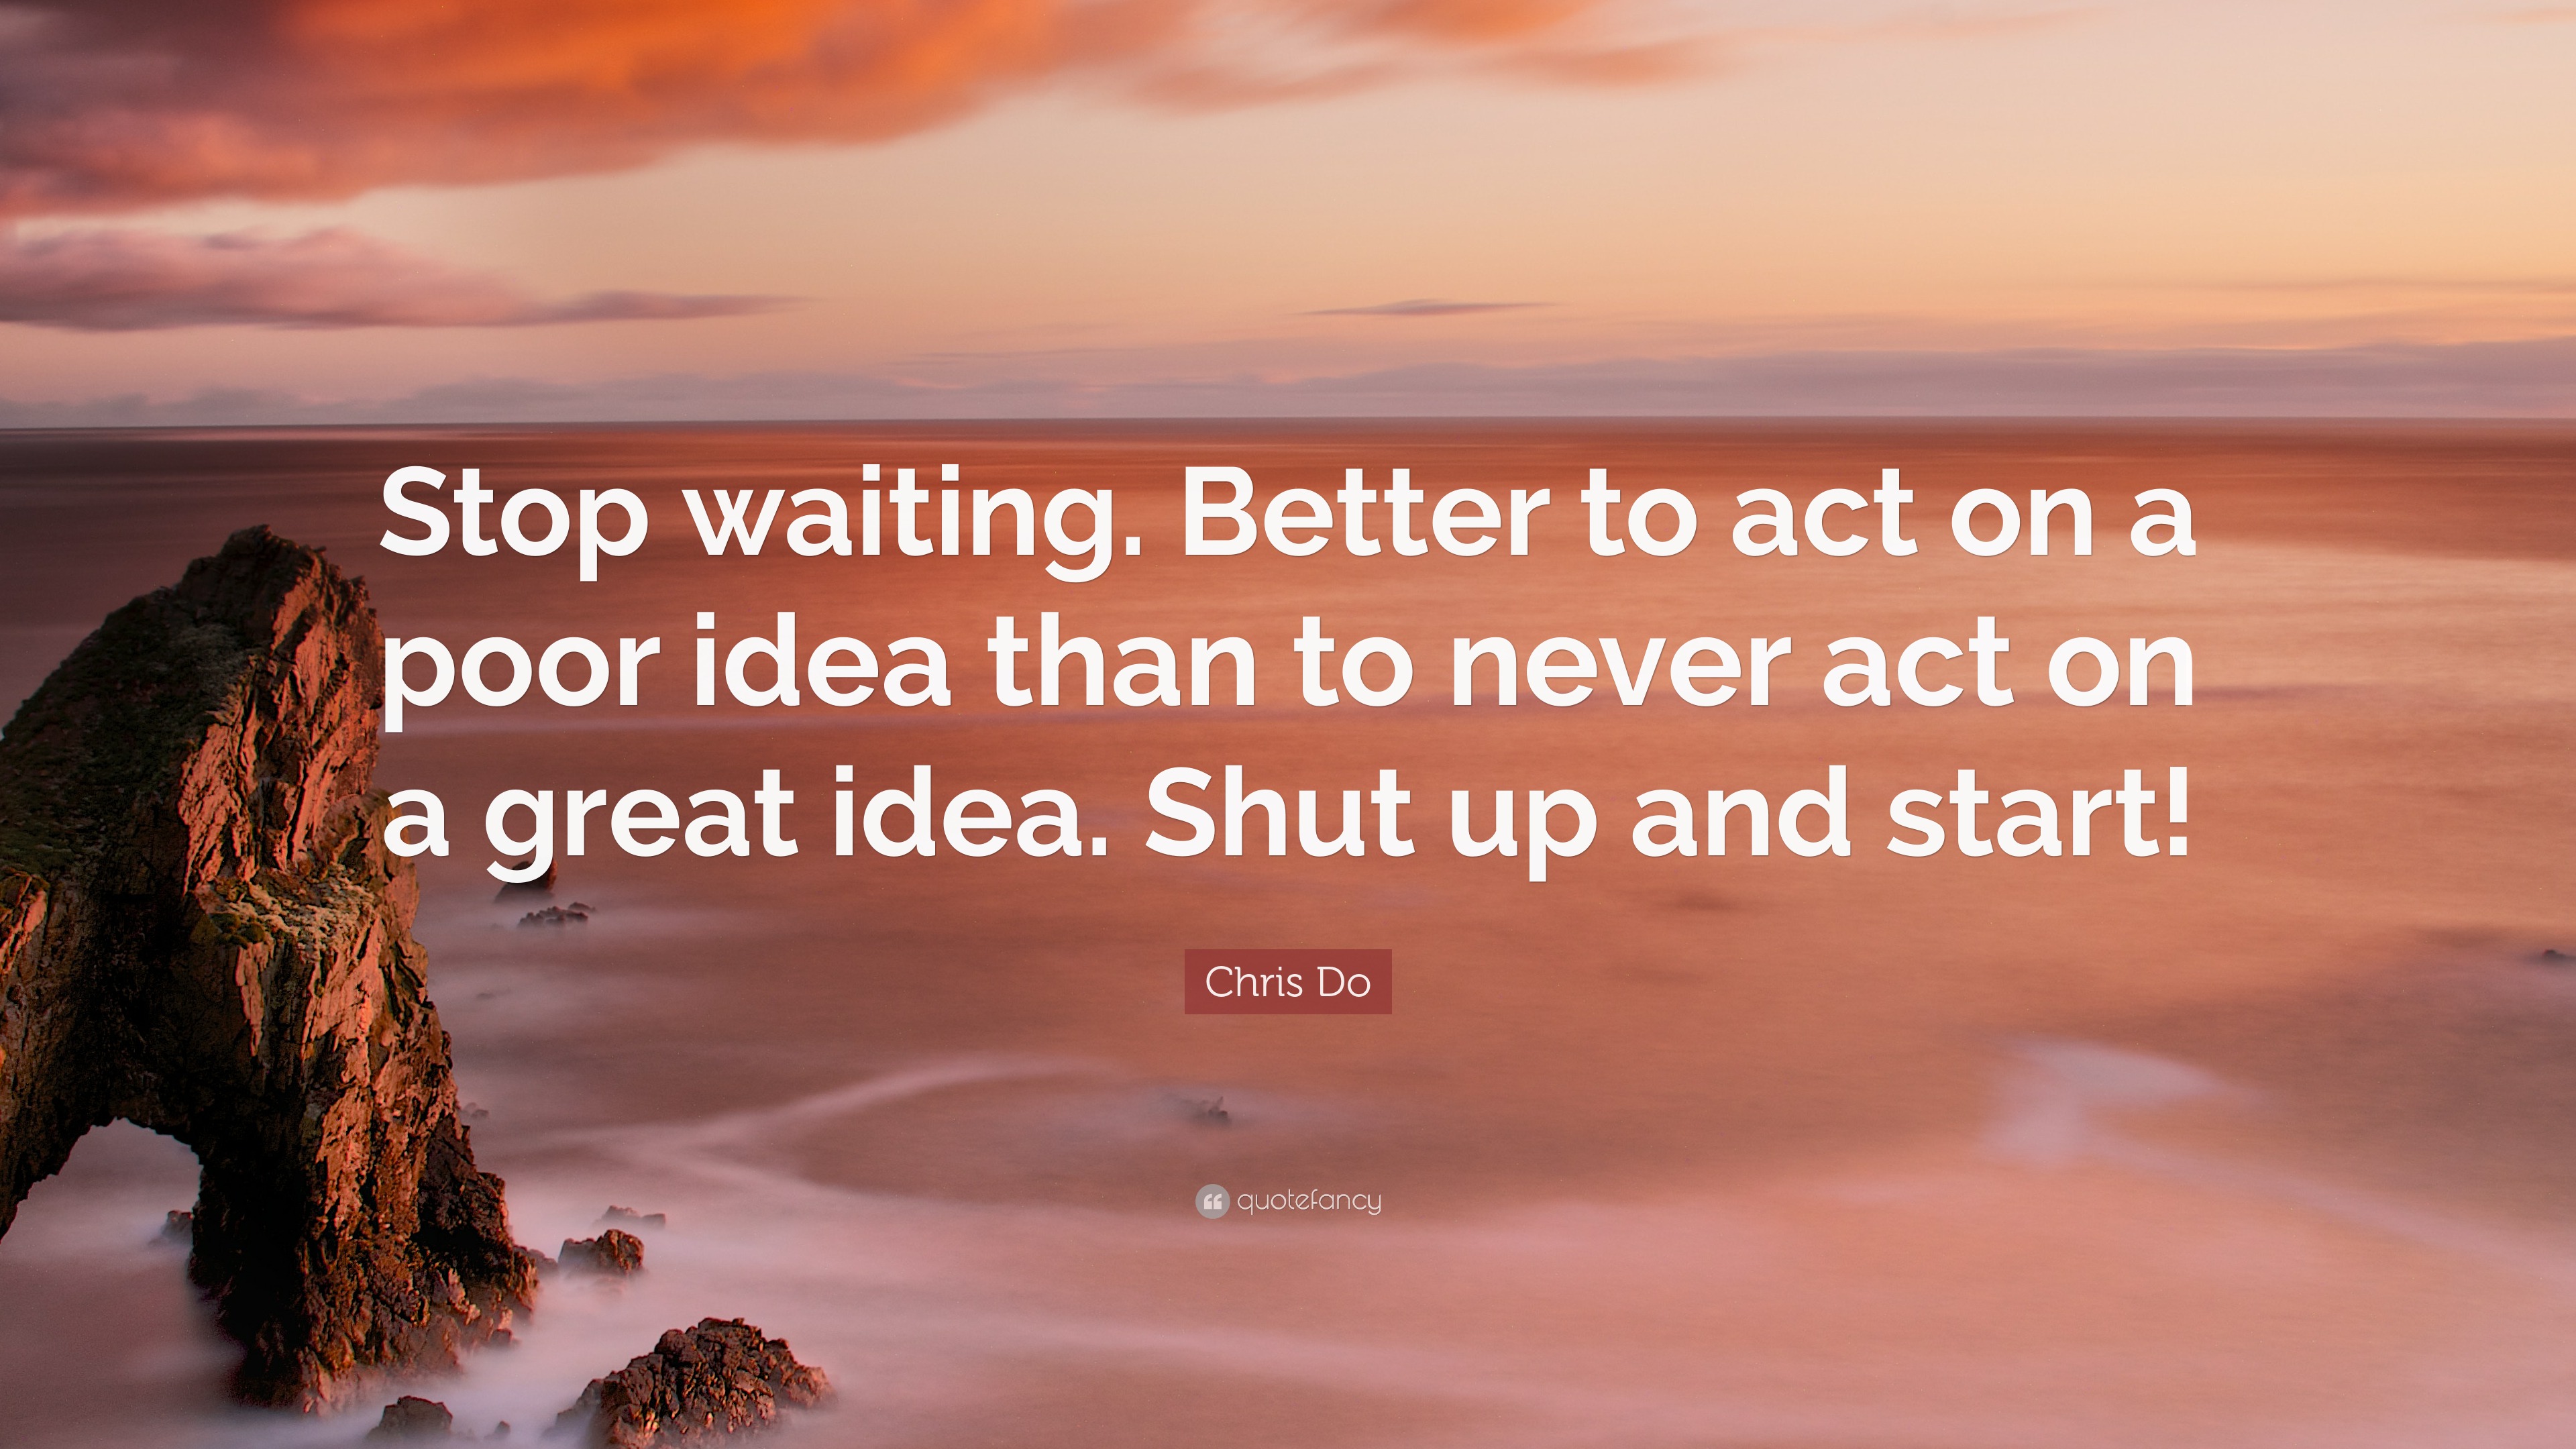 Chris Do Quote: “Stop waiting. Better to act on a poor idea than to ...